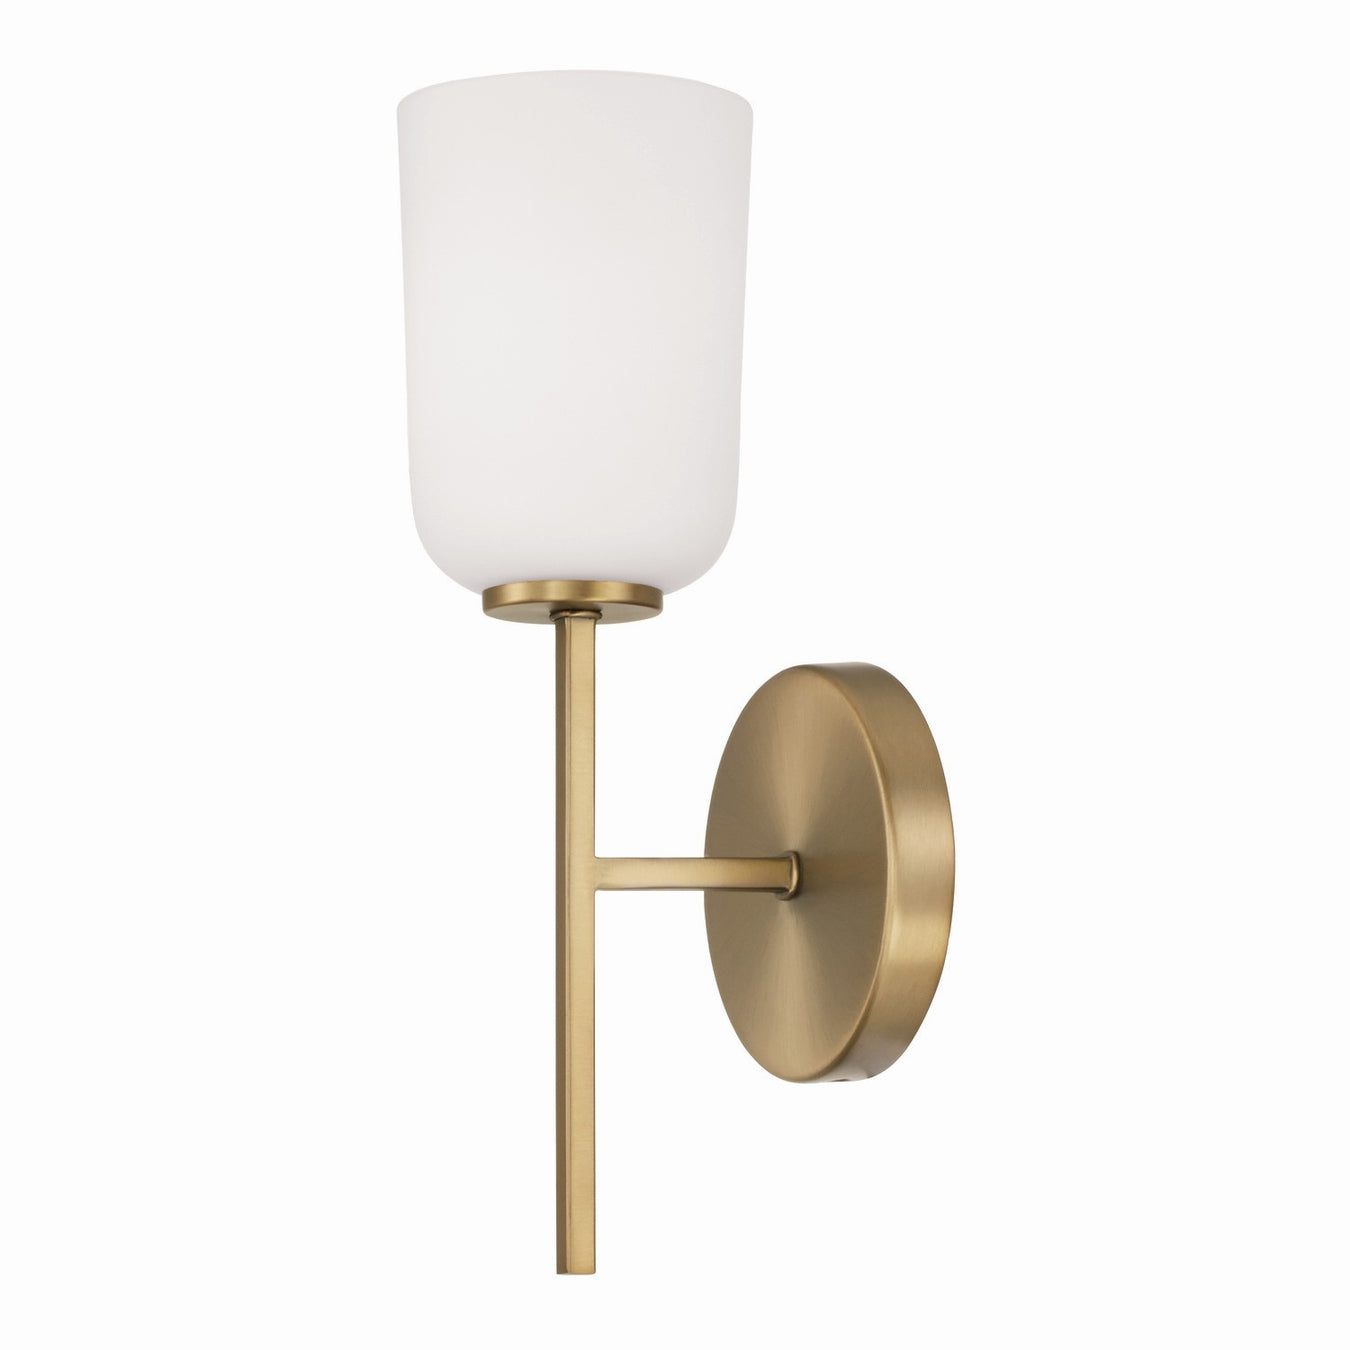 Lawson One Light Wall Sconce in Aged Brass